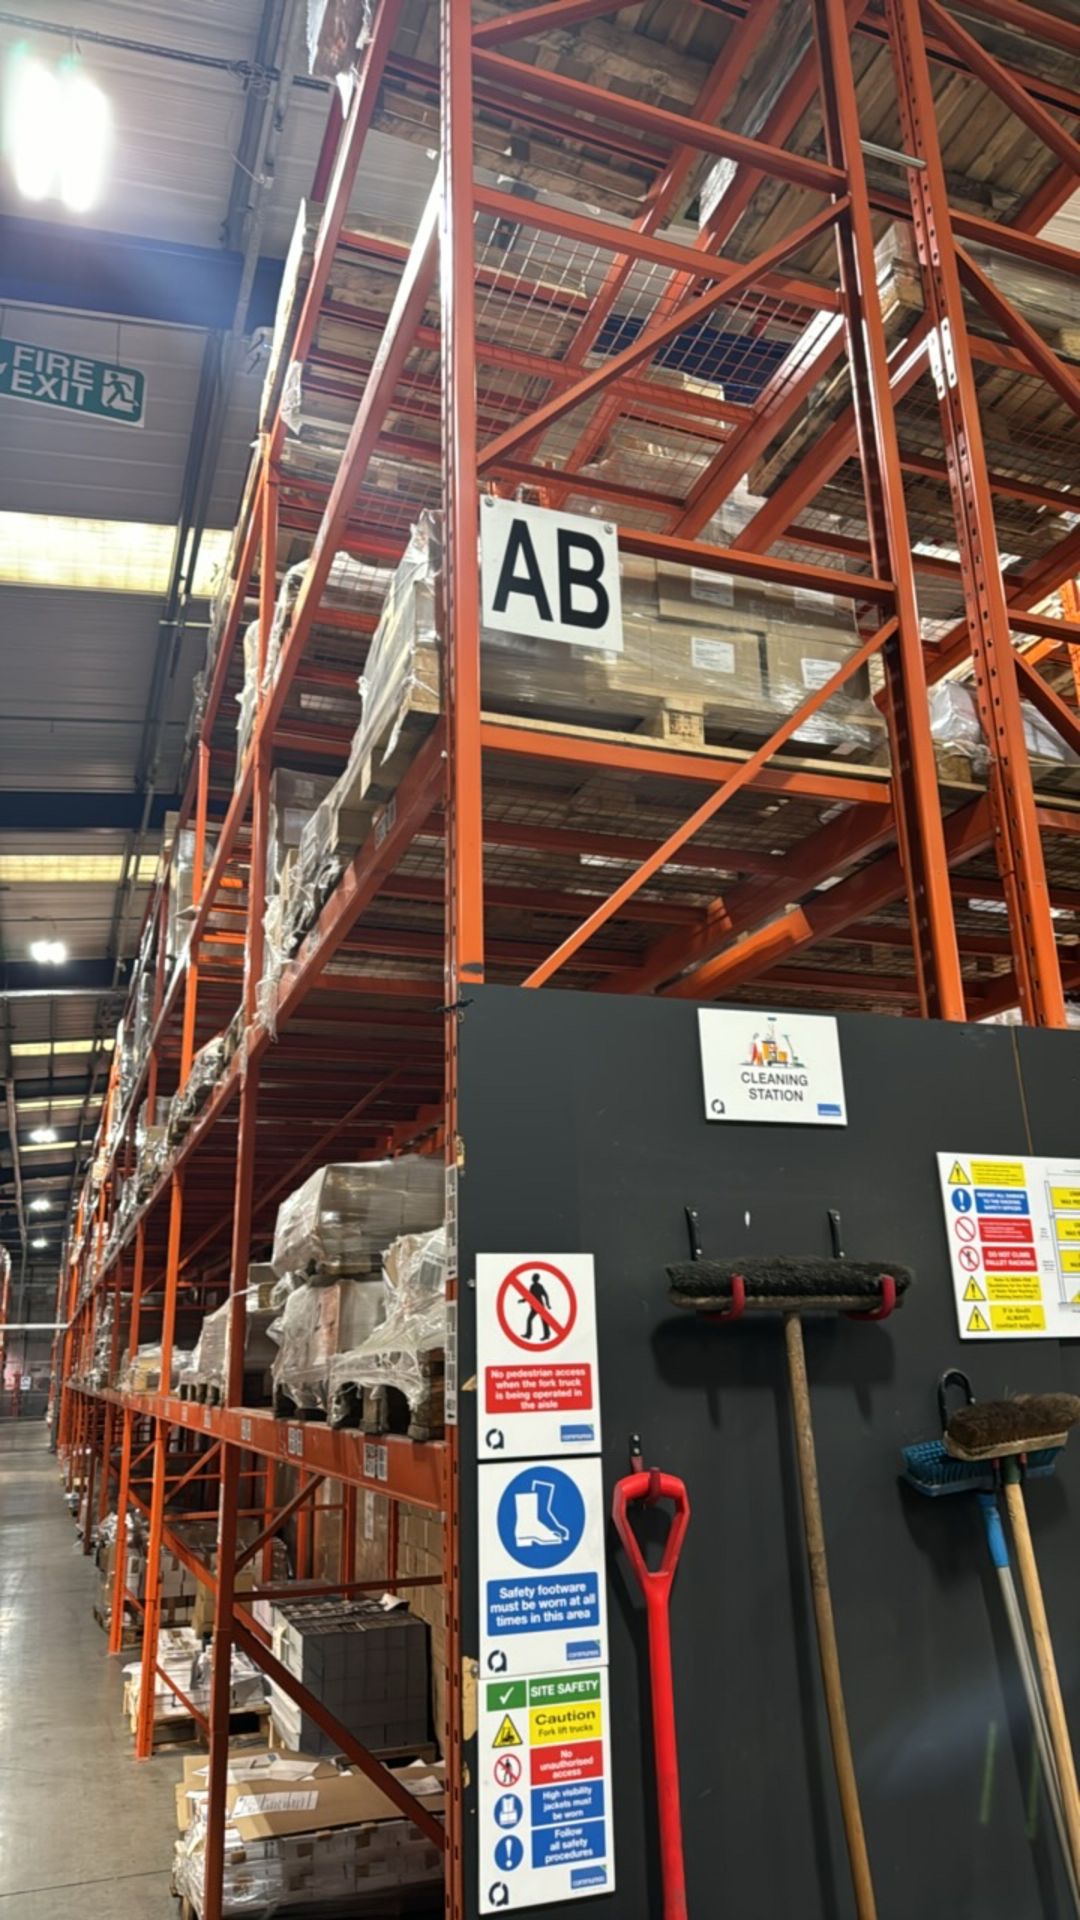 24 Bays Of Boltless Pallet Racking - Image 2 of 8